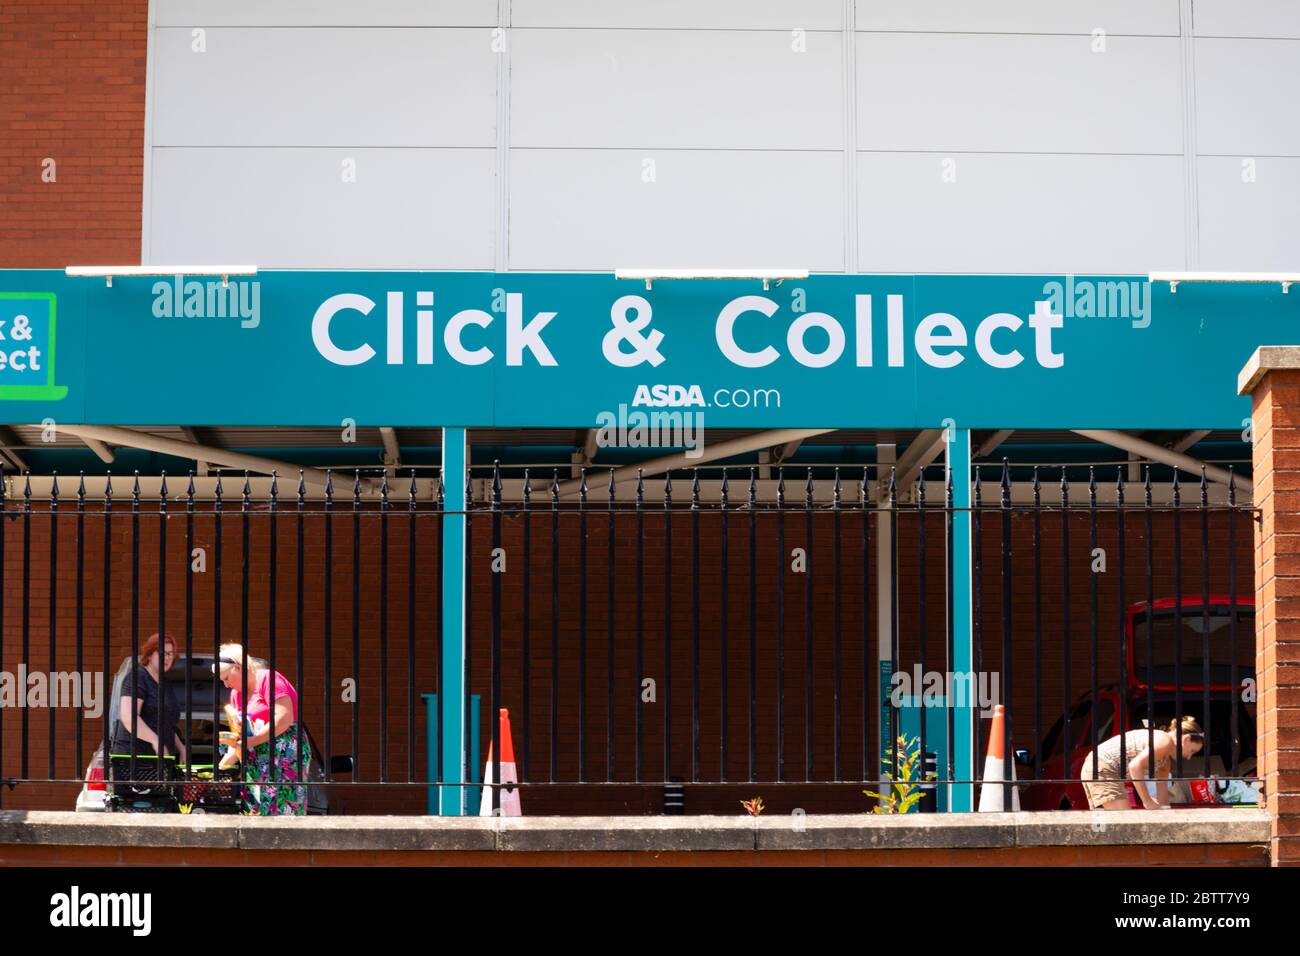 ASDA supermarket “click & collect” bays with customers loading cars. Grantham, Lincolnshire, England. May 2020 Stock Photo